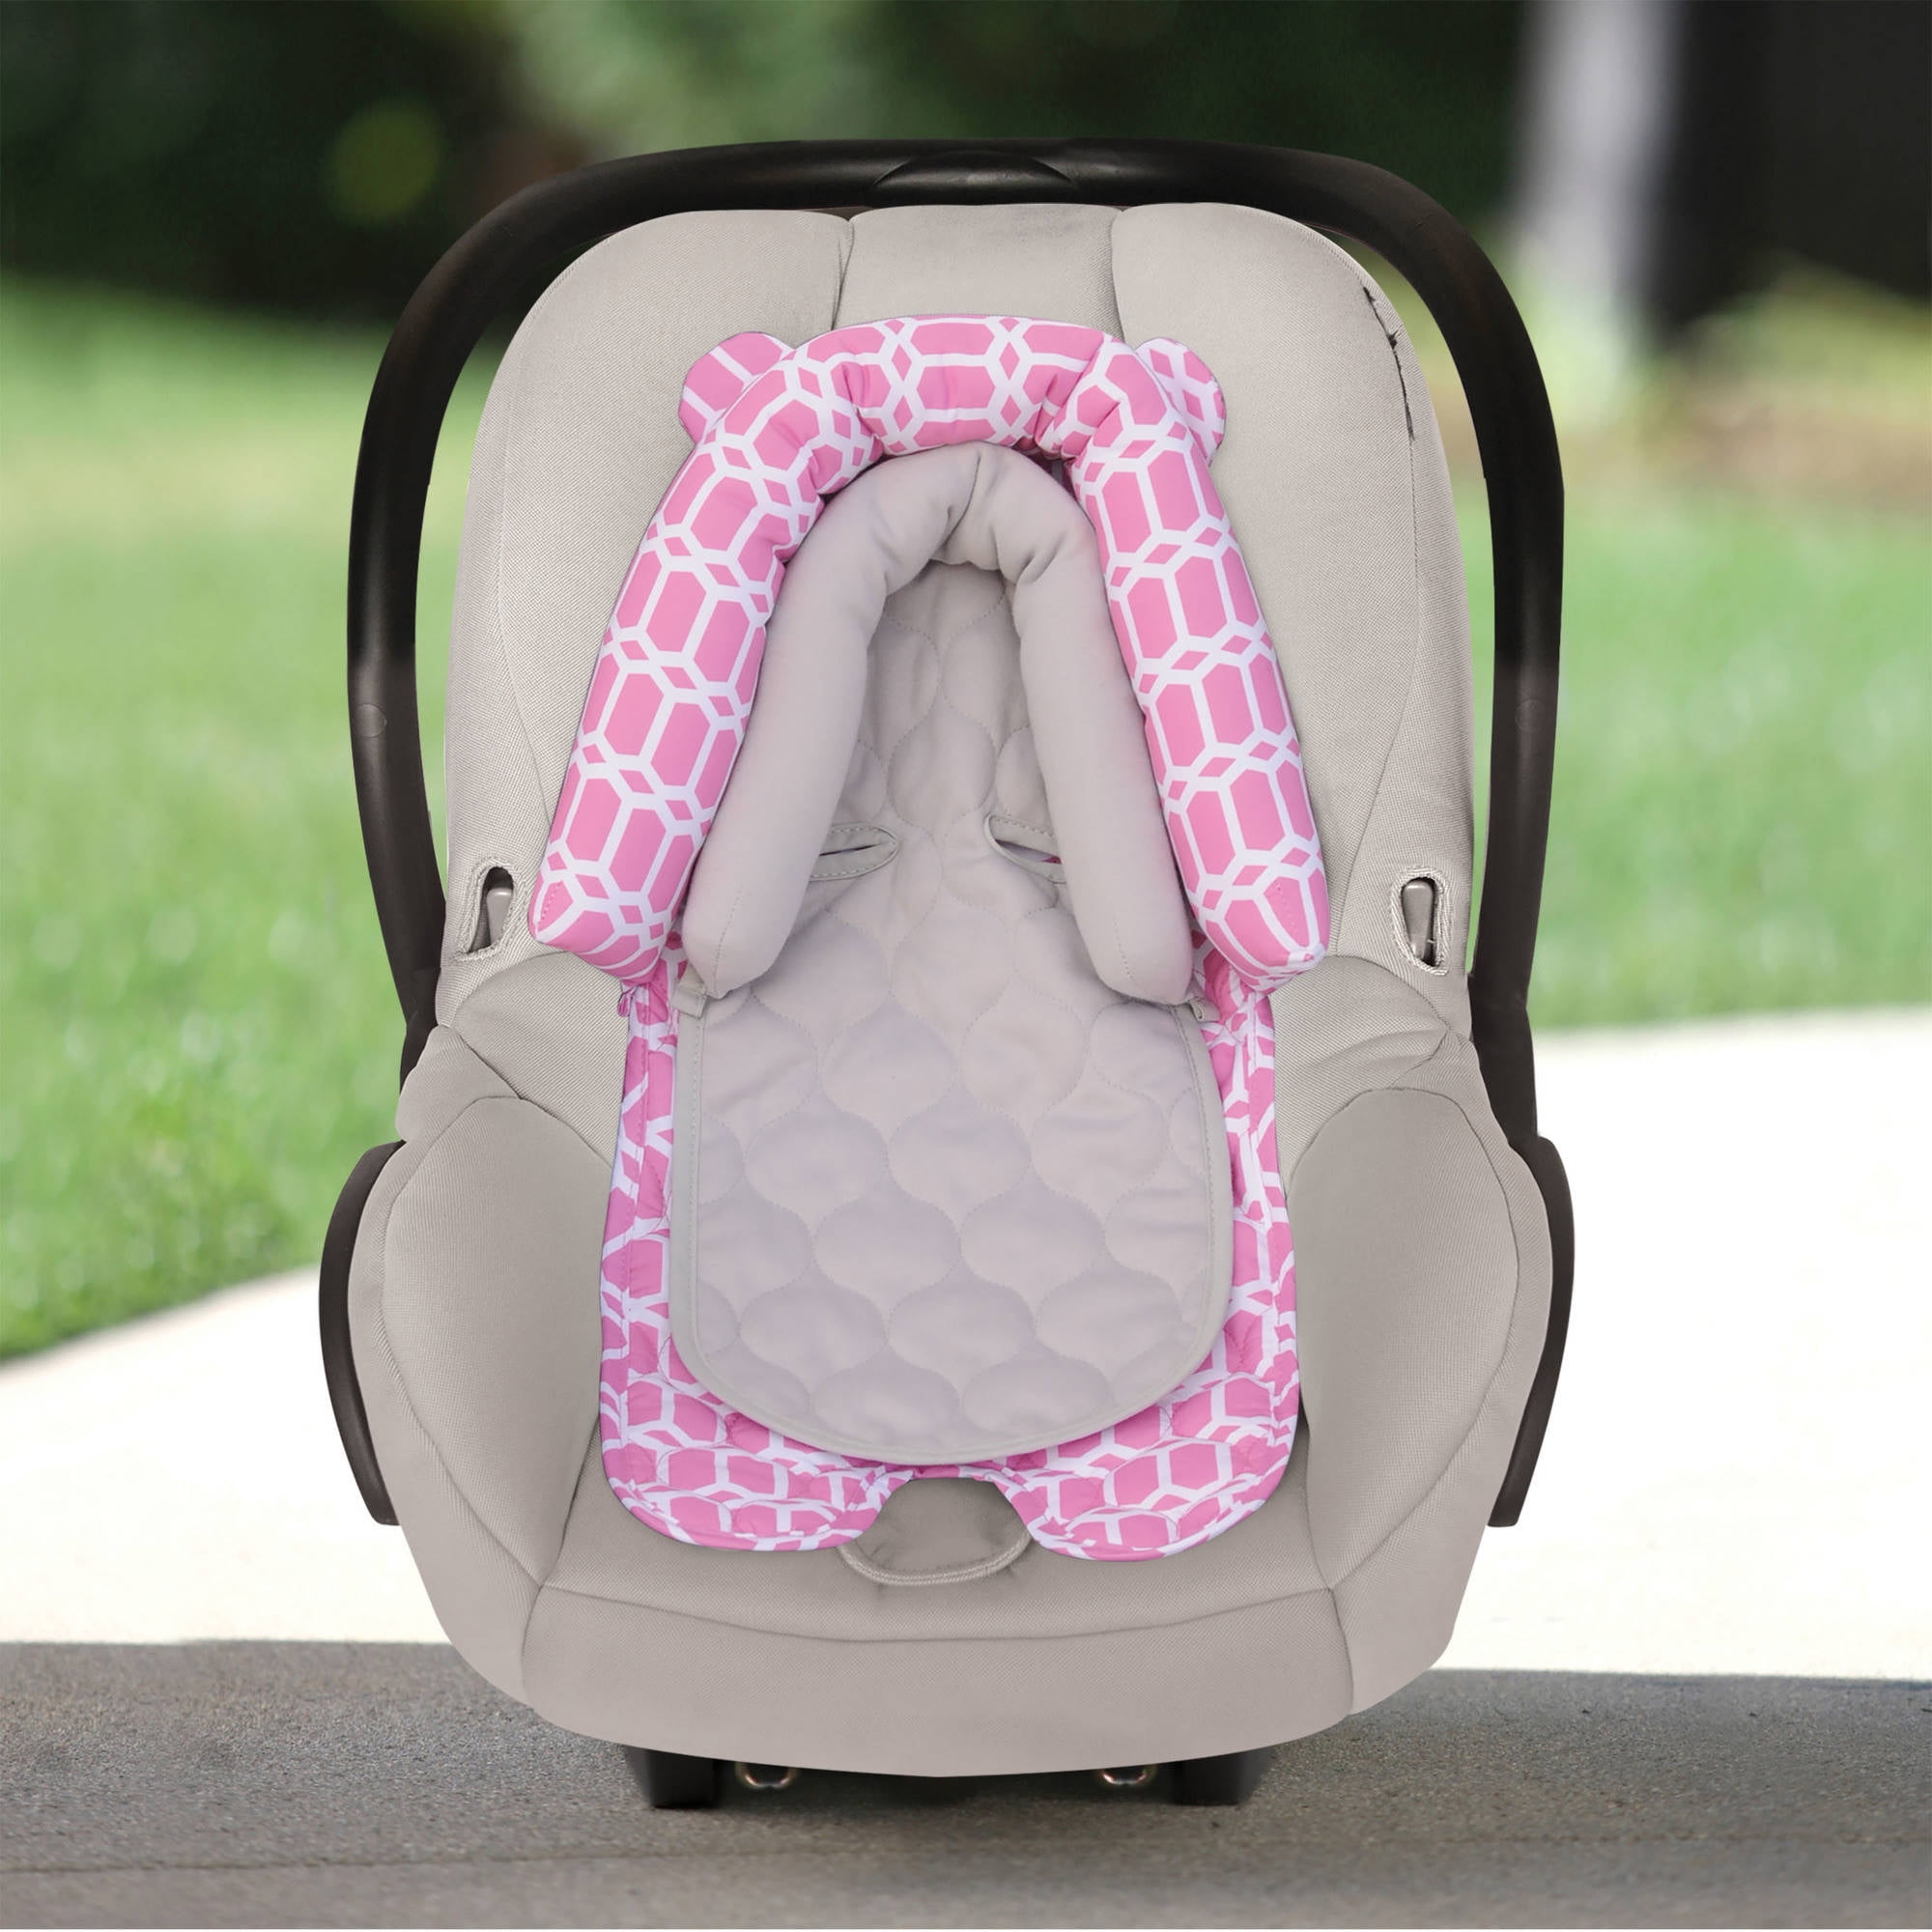 Goldbug 2-in-1 Newborn Infant Head Support, Insert for Car Seat, Pink